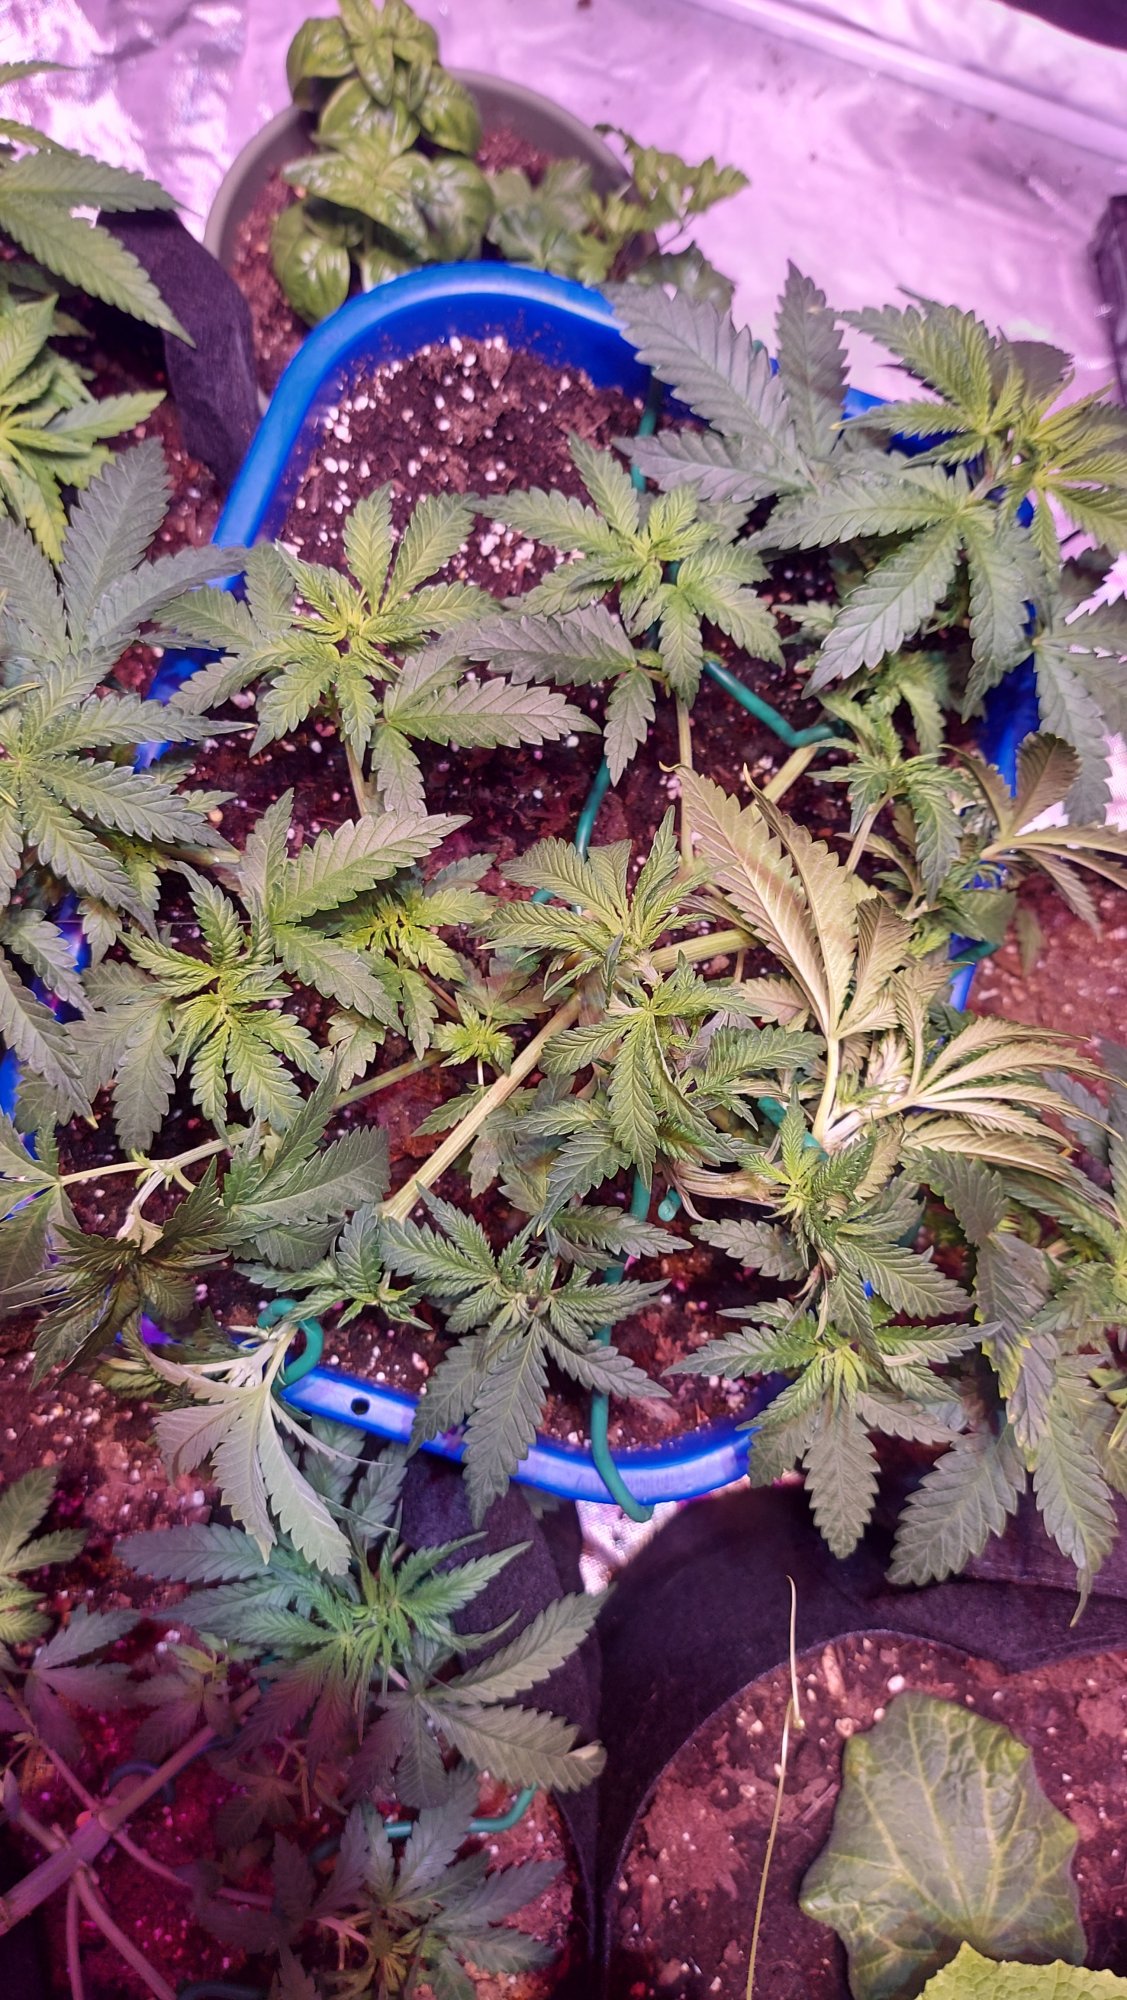 Diaries of my first grow ever  with pics 8